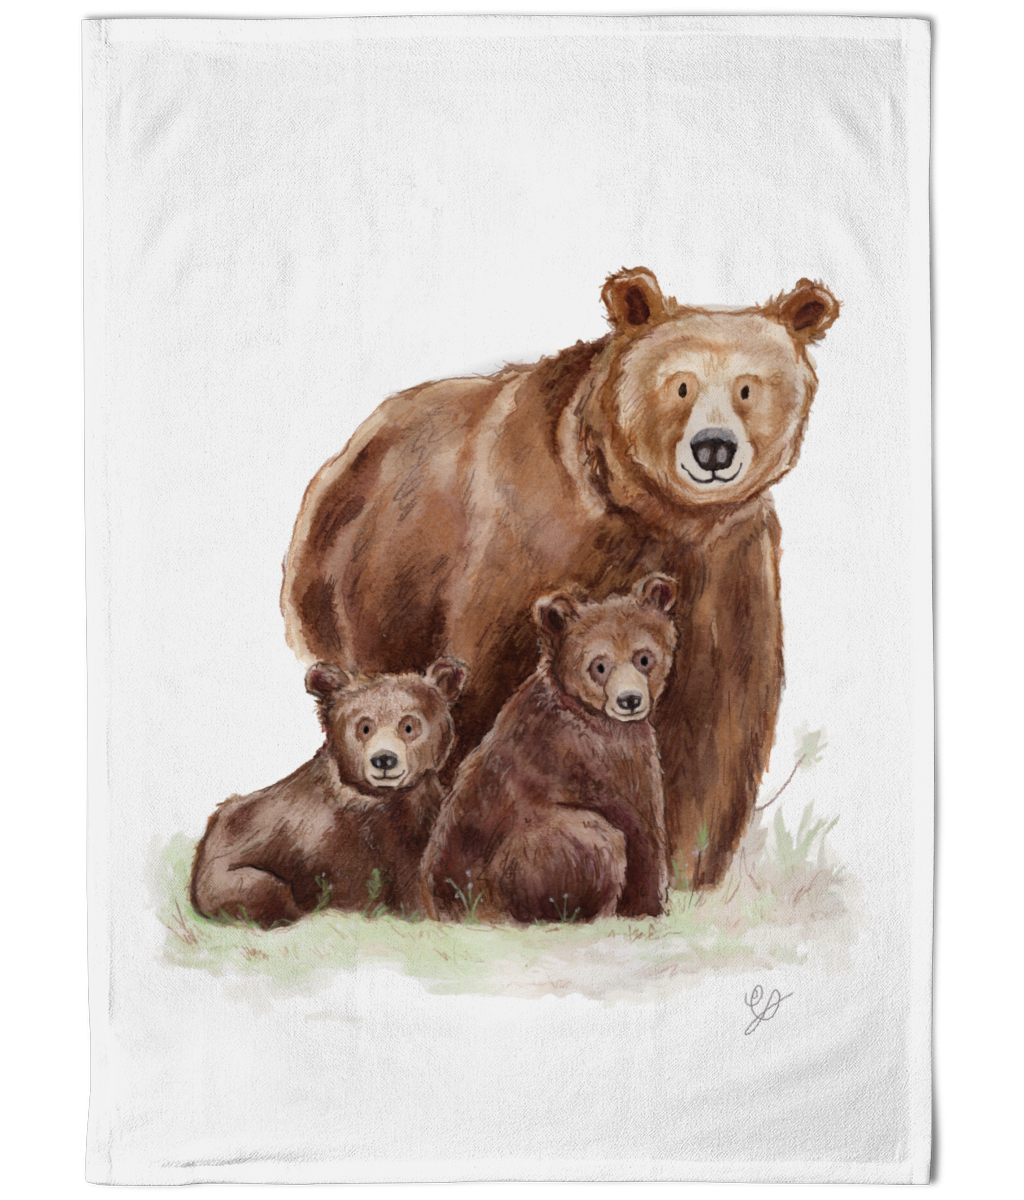 A cotton tea towel featuring a watercolour painting of three bears